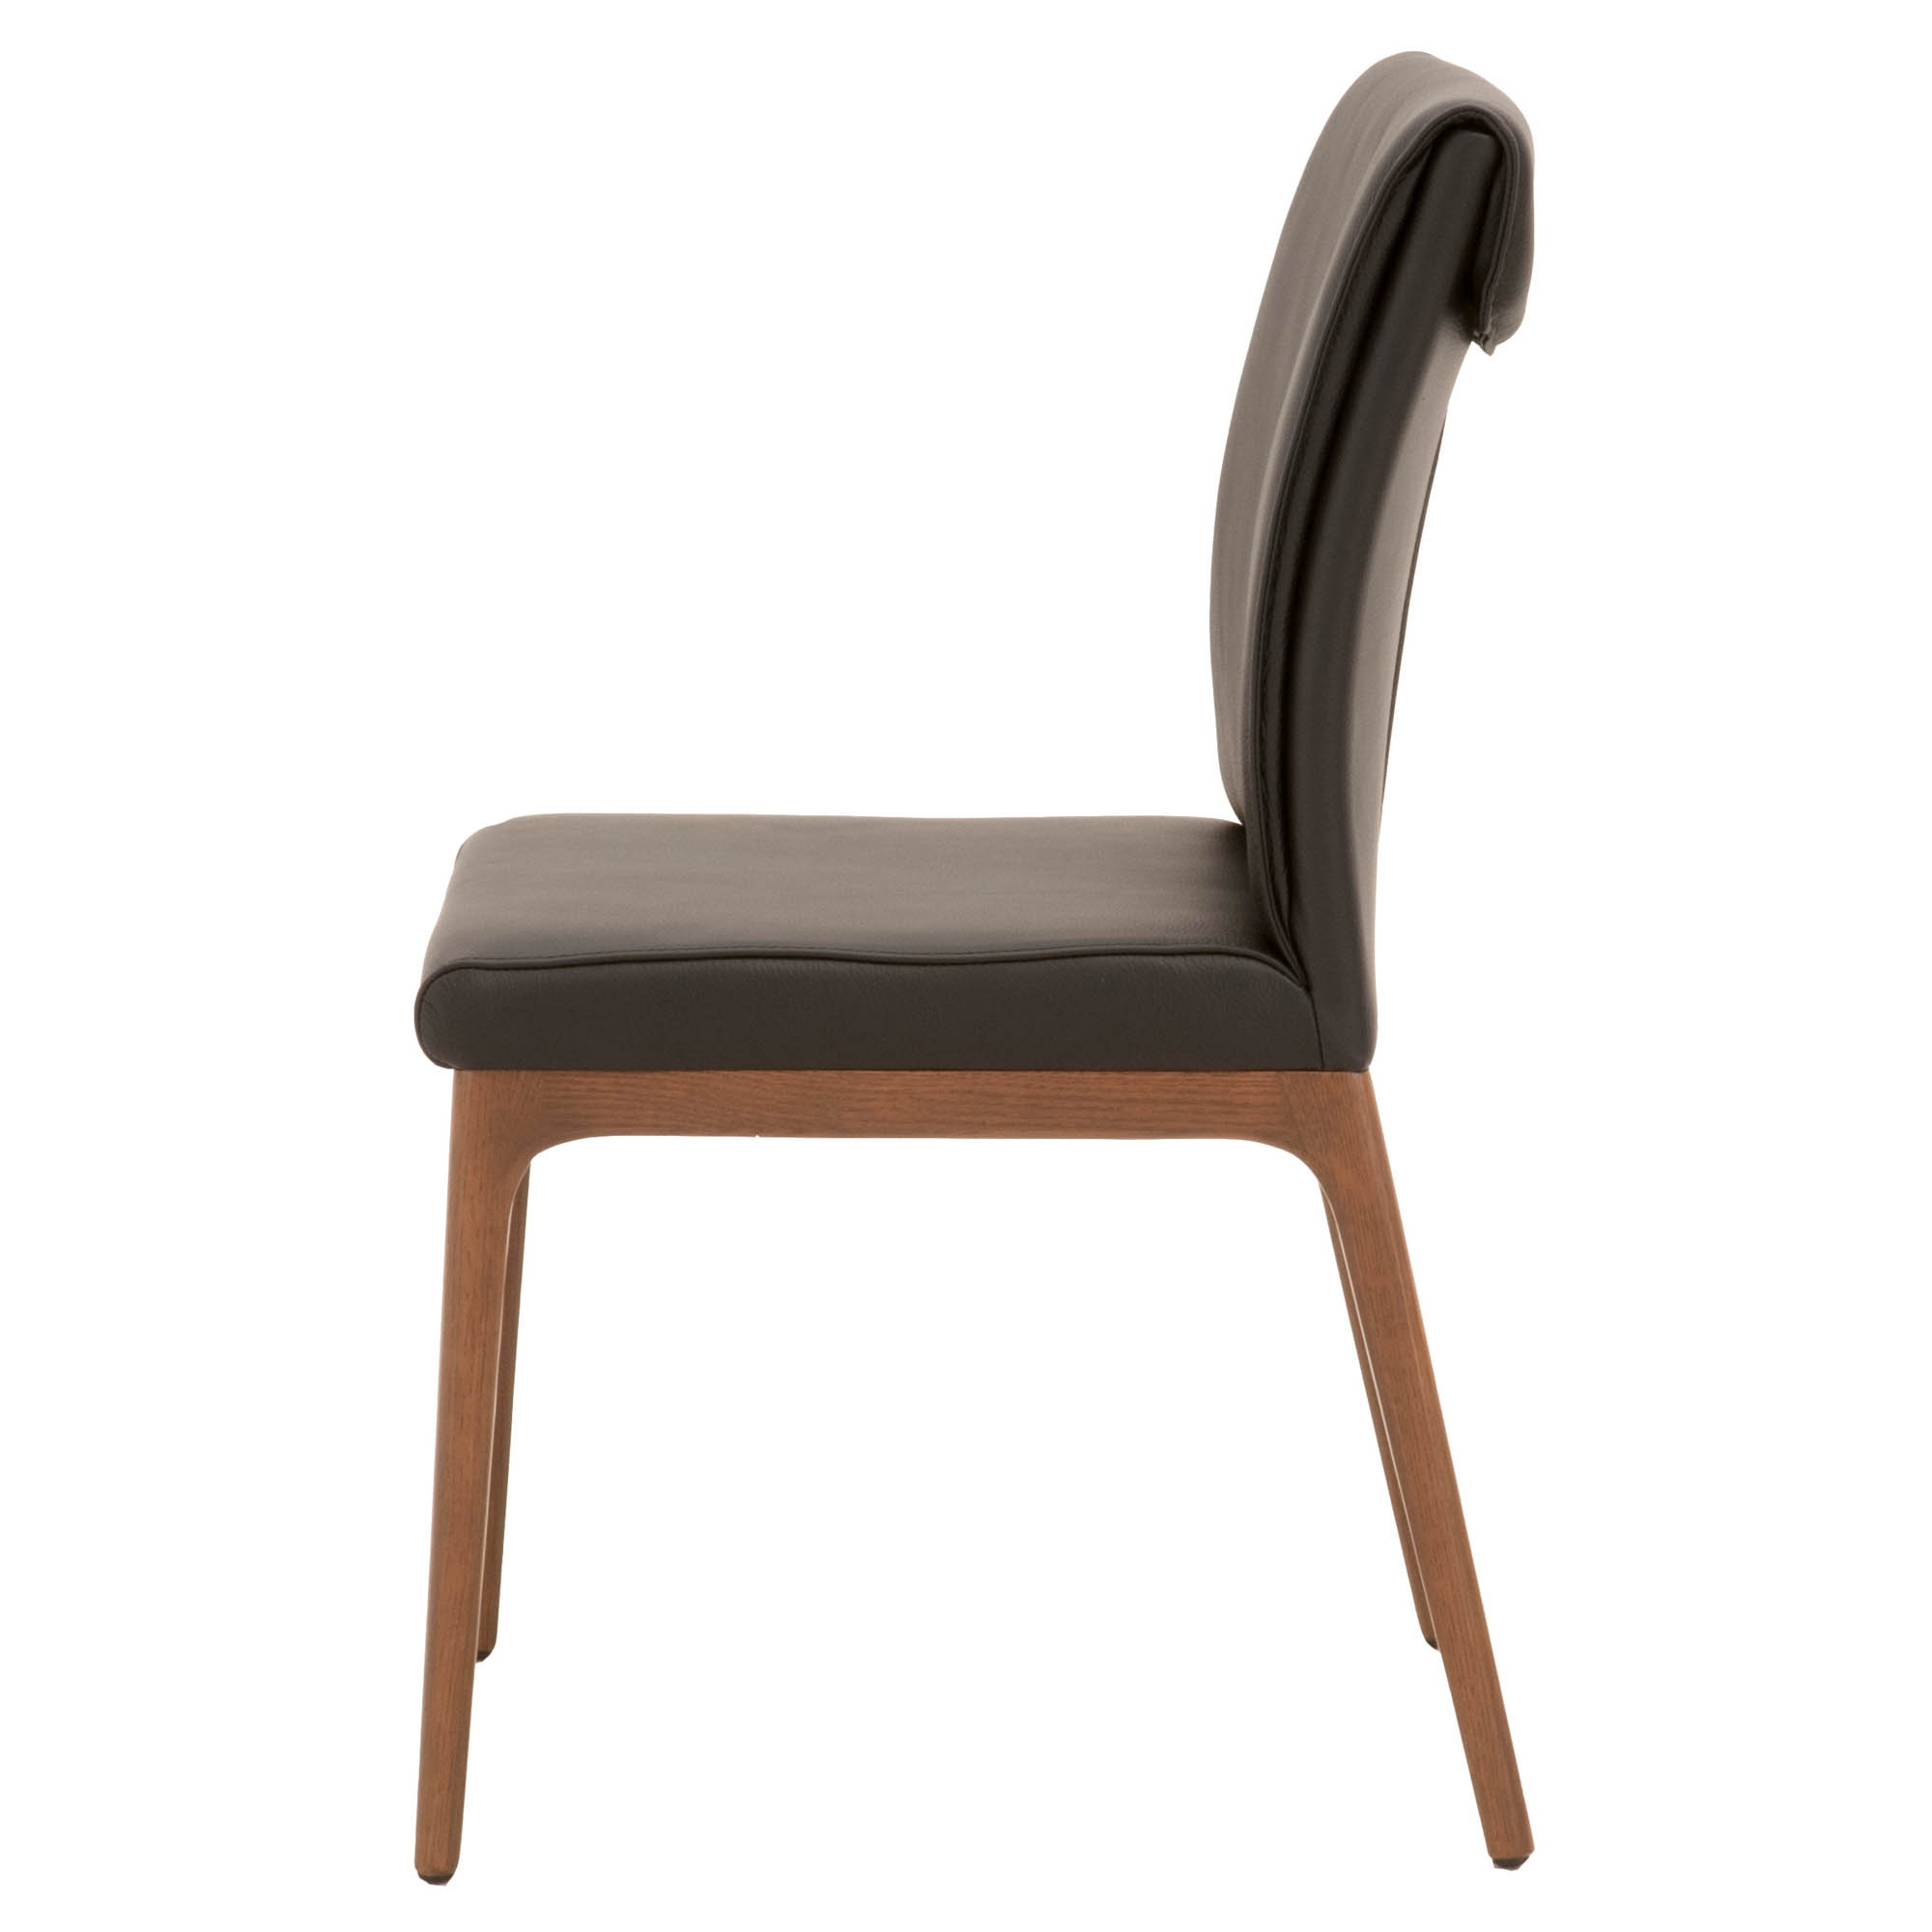 Alex Dining Chair, Sable Top Grain Leather, Set of 2 - Image 2